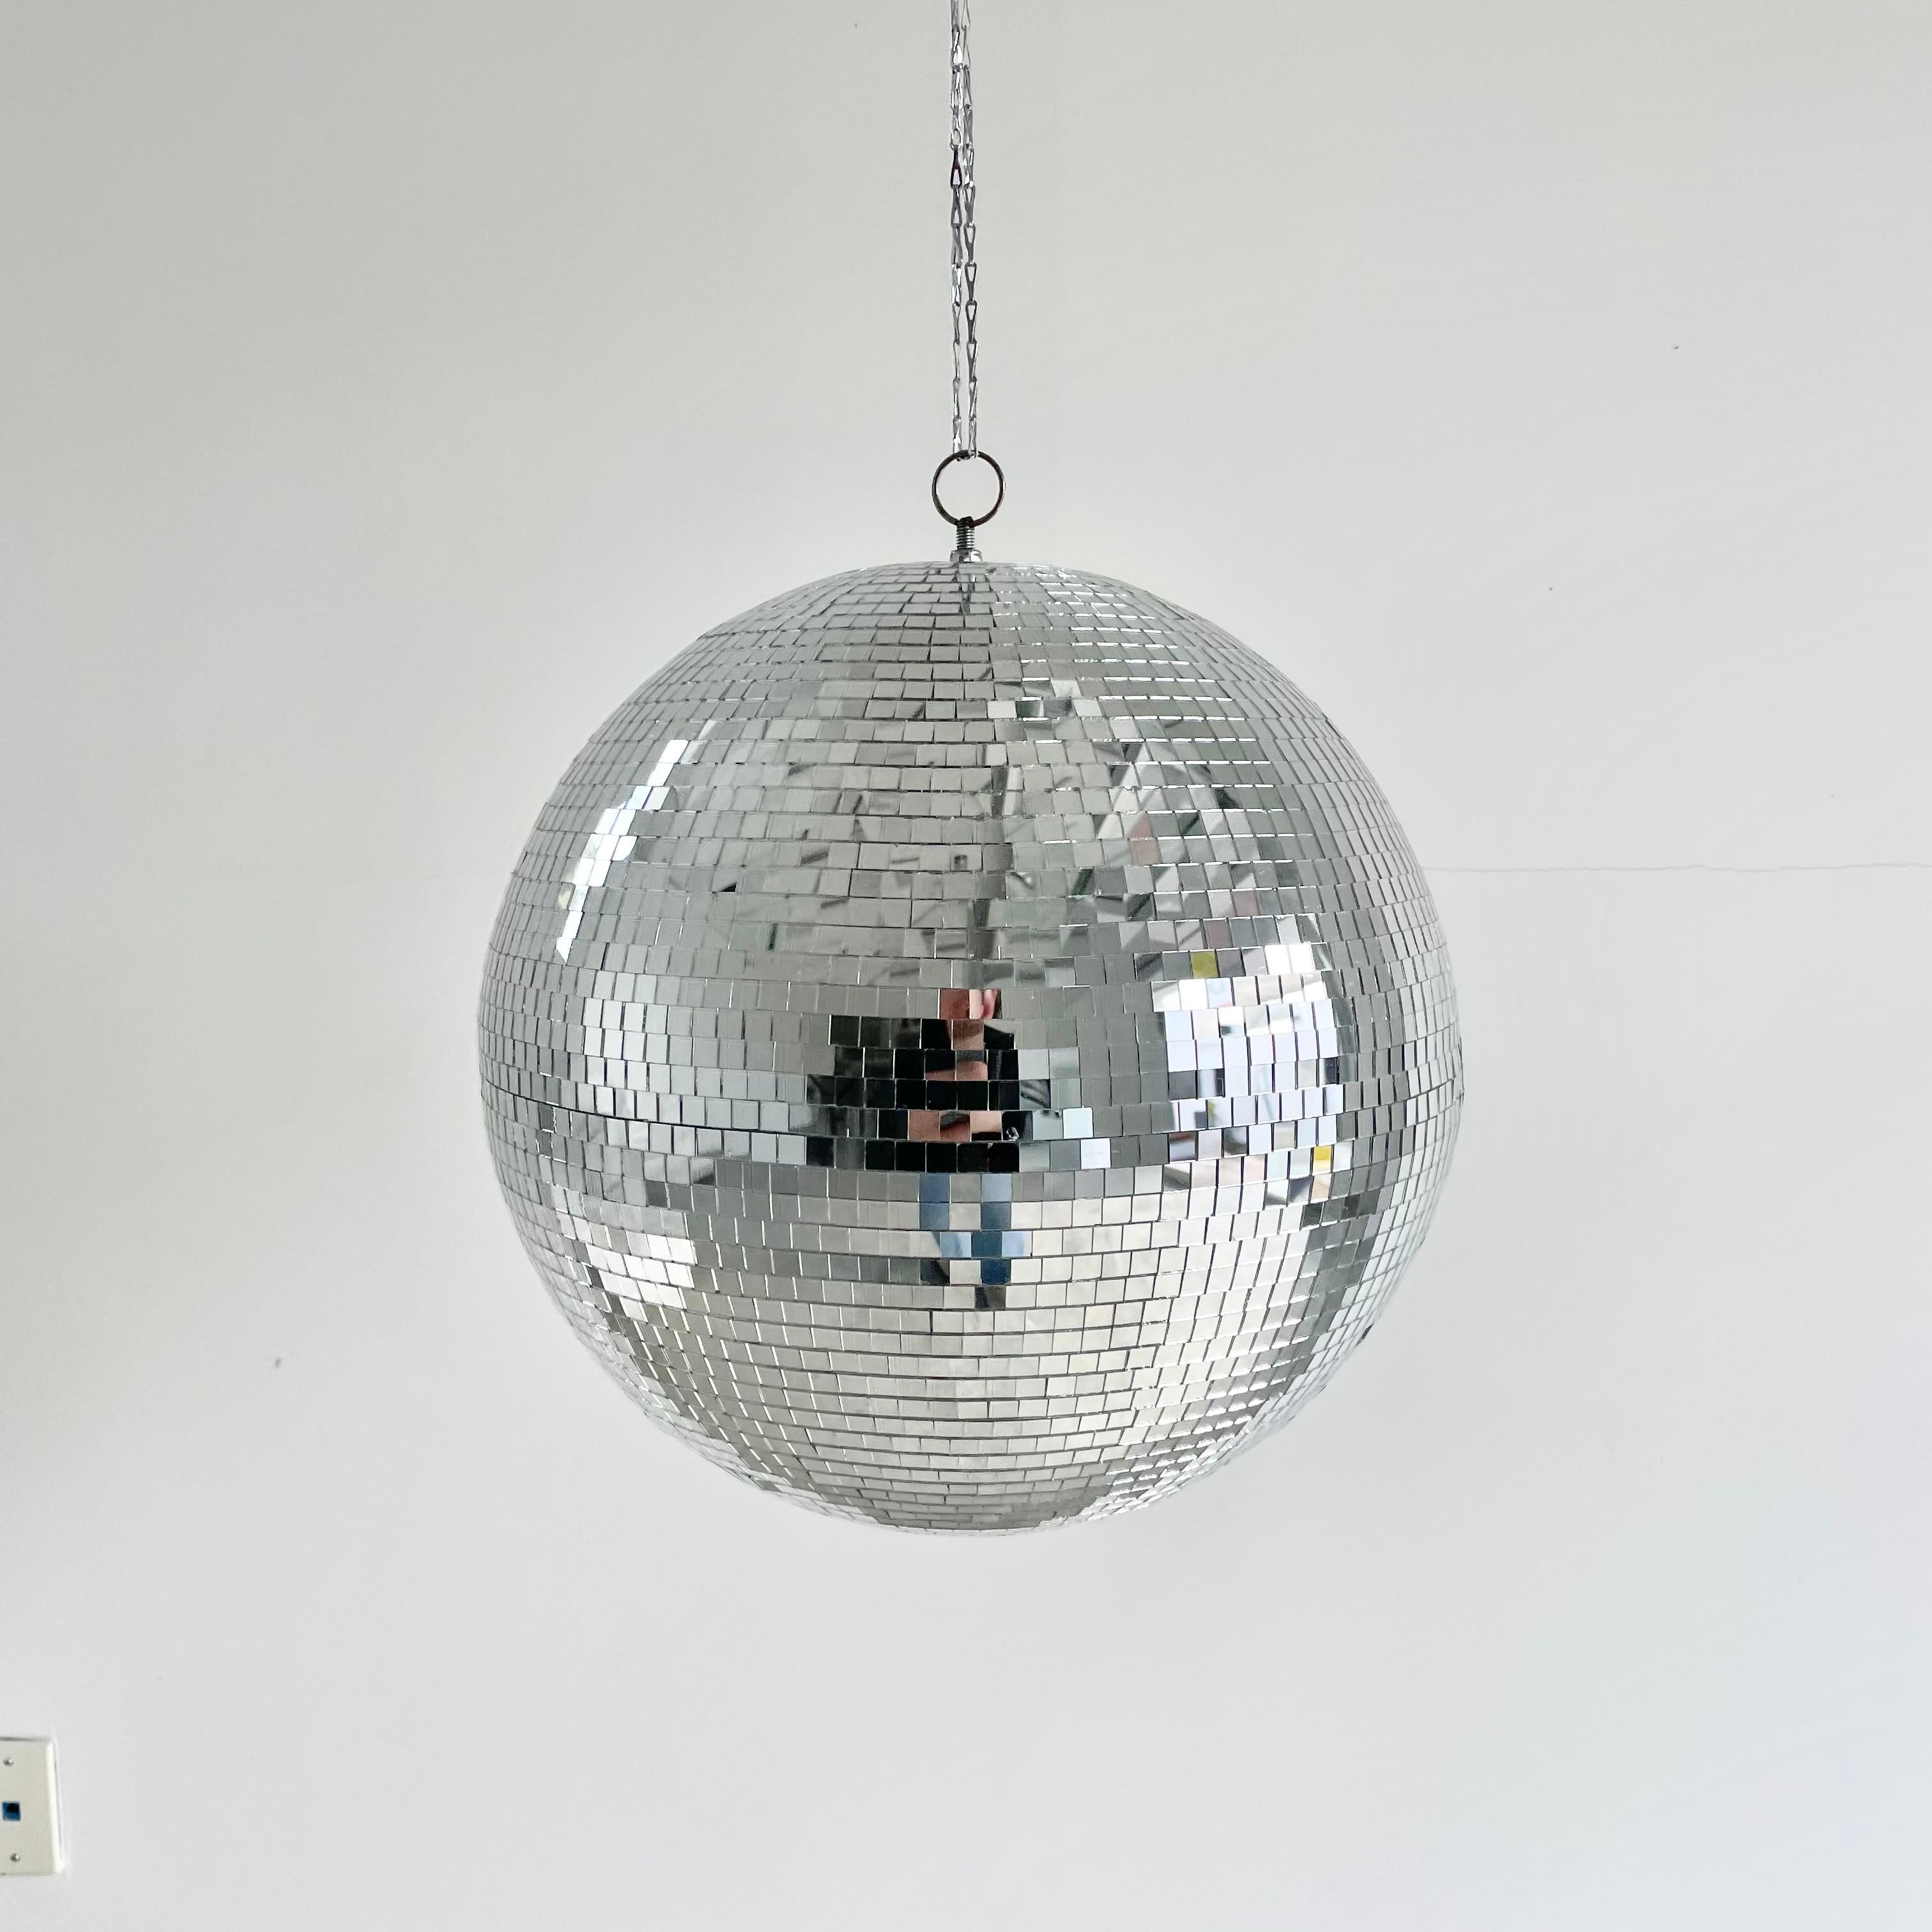 Large retro disco ball made out of small individually cut square pieces of glass. Great condition. Illuminates beautifully. Has a metal ring at the top which is connected to a 3 foot long silver chain link which can be taken off if desired. Uncommon